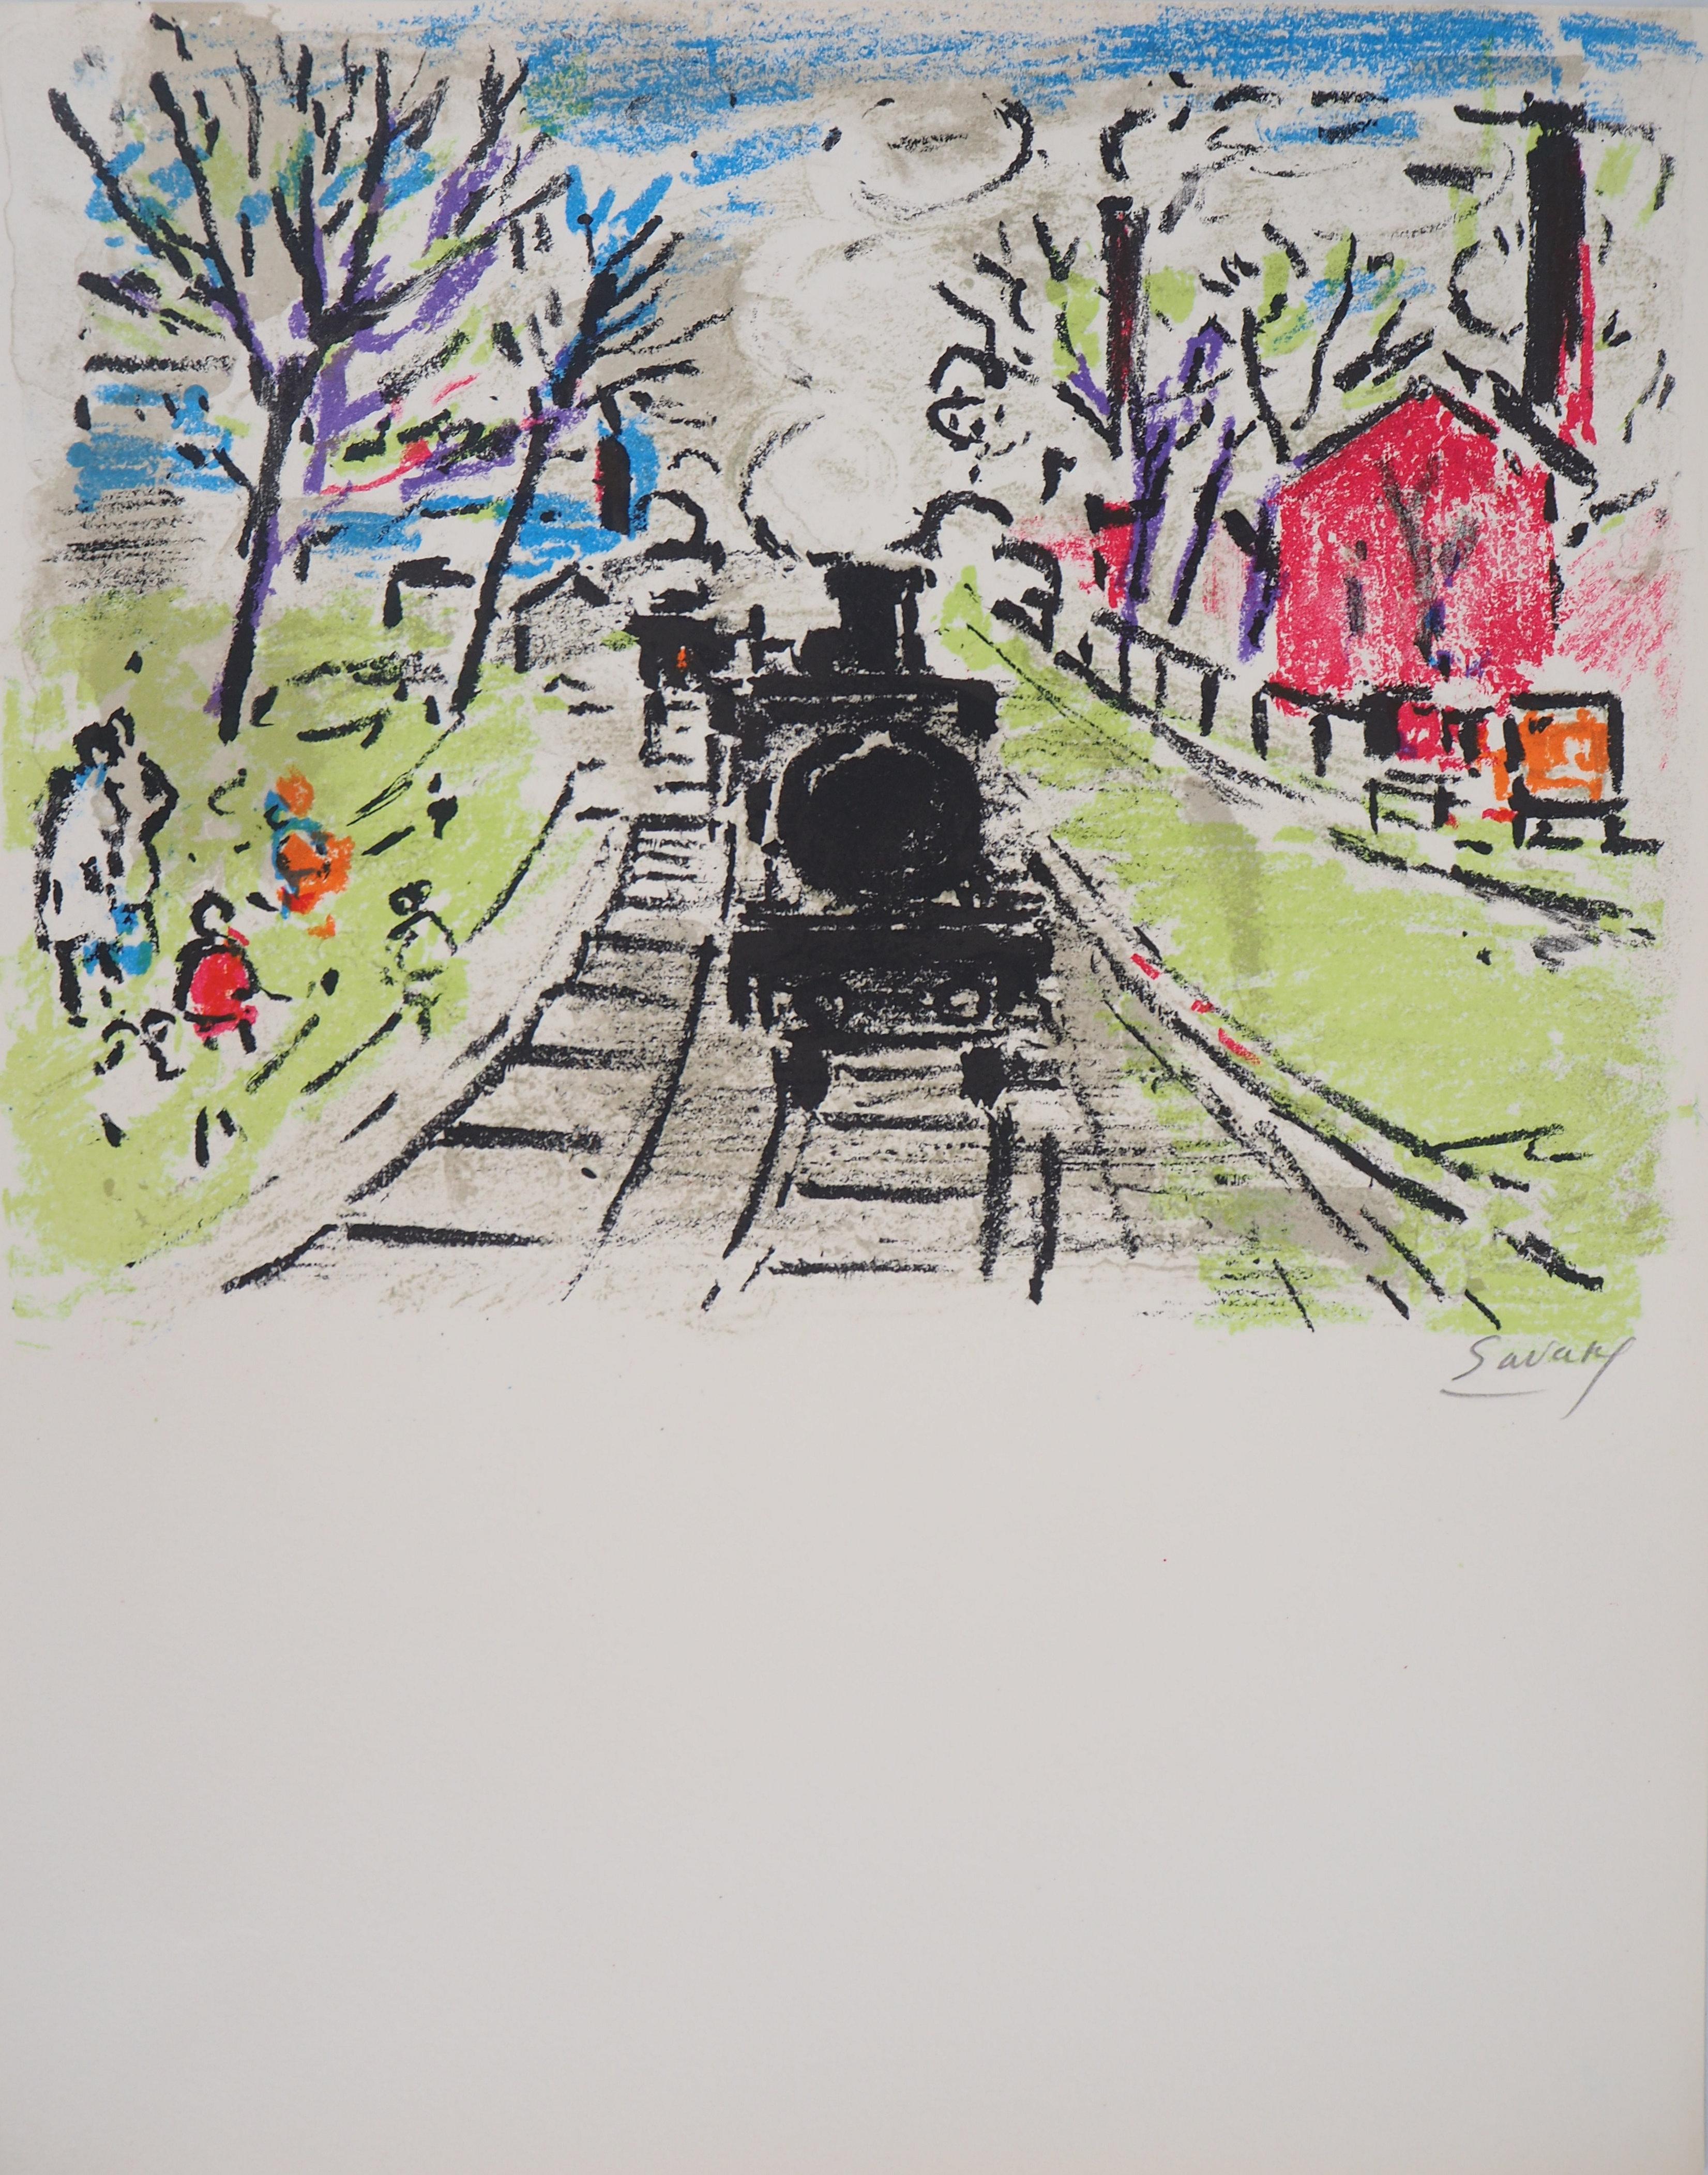 Paris : The Old Steam Train - Original Lithograph, Handsigned - Print by Robert Savary